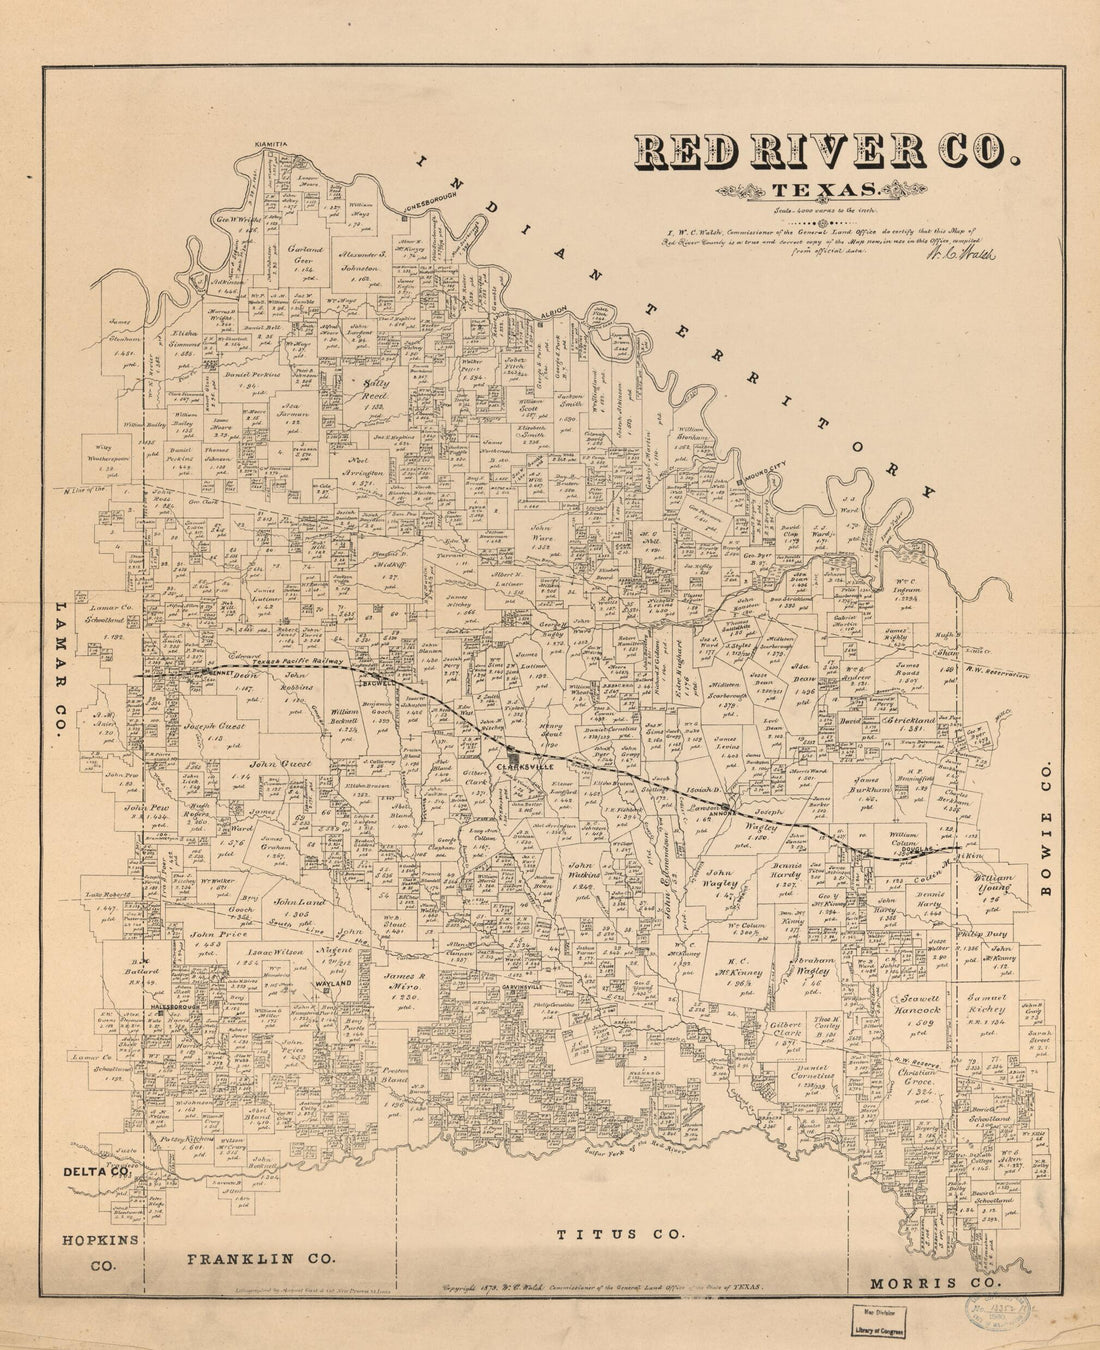 This old map of Red River Co., Texas (Red River County, Texas) from 1879 was created by  August Gast &amp; Co,  Texas. General Land Office, W. C. (William C.) Walsh in 1879